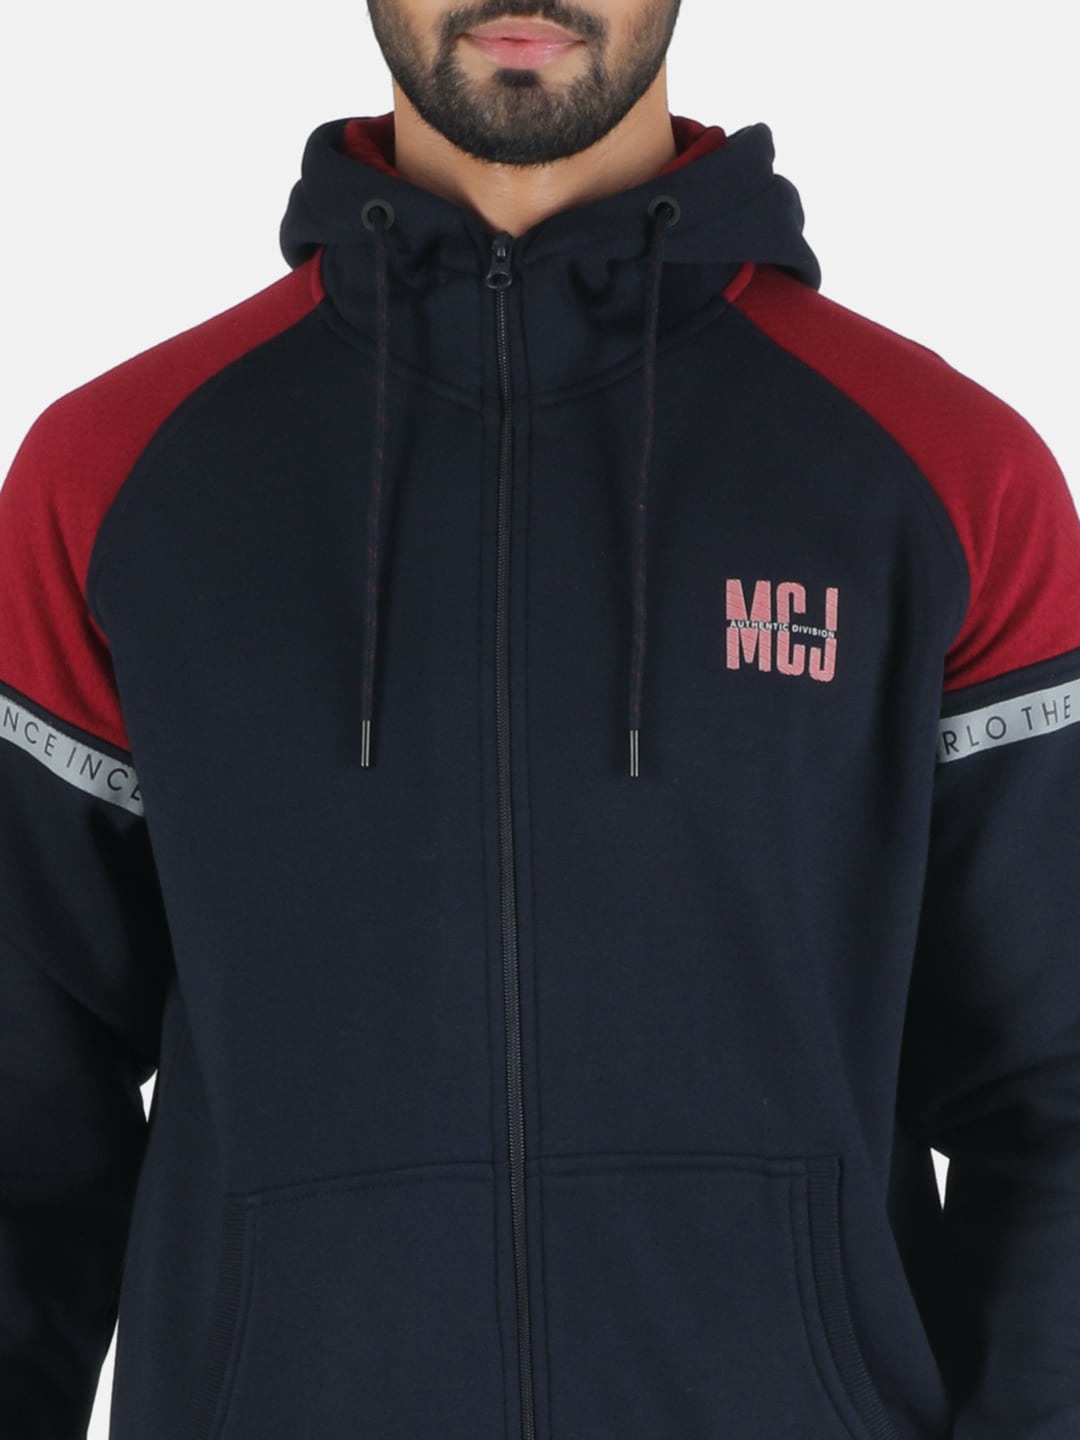 Clothing Tracksuits | Monte Carlo Men Navy Blue & Red Track Suit - SB32833